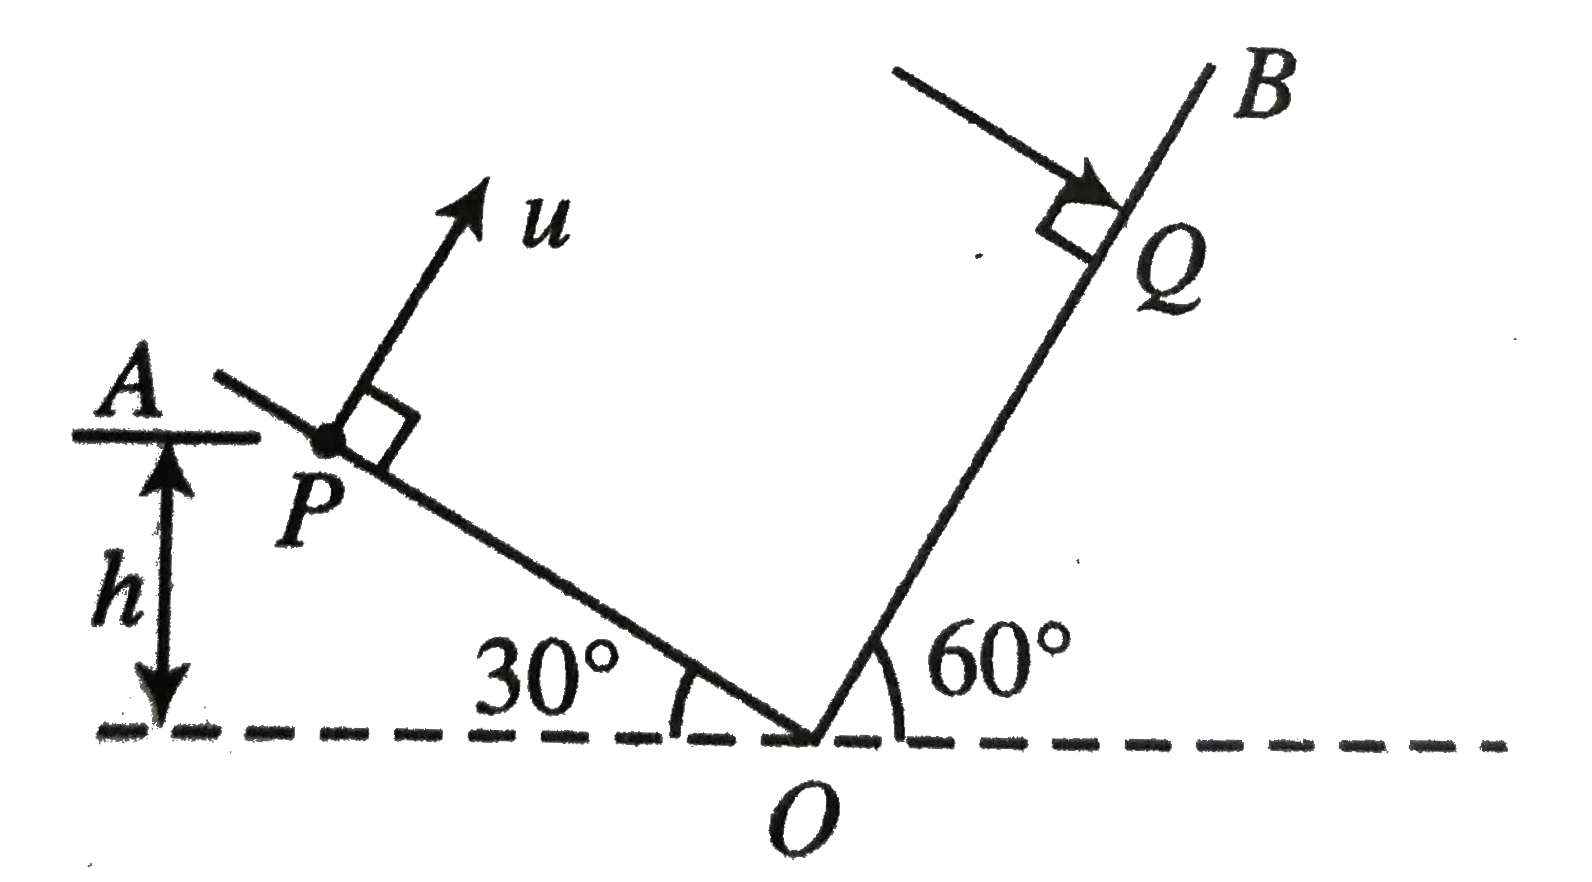 Two inclined planes OA and OB having inclination (with horizontal) 30^(@) and 60^@(with horizontal), respectively, intersect each other at O as shown in figure. A particle is projected from point P with velocity u = 10sqrt3 ms^(-1) along a direction perpendicular to plane OA. If the particle strikes plane OB perpendicularly at Q, calculate      The maximum height attained by the particle (from the line O)